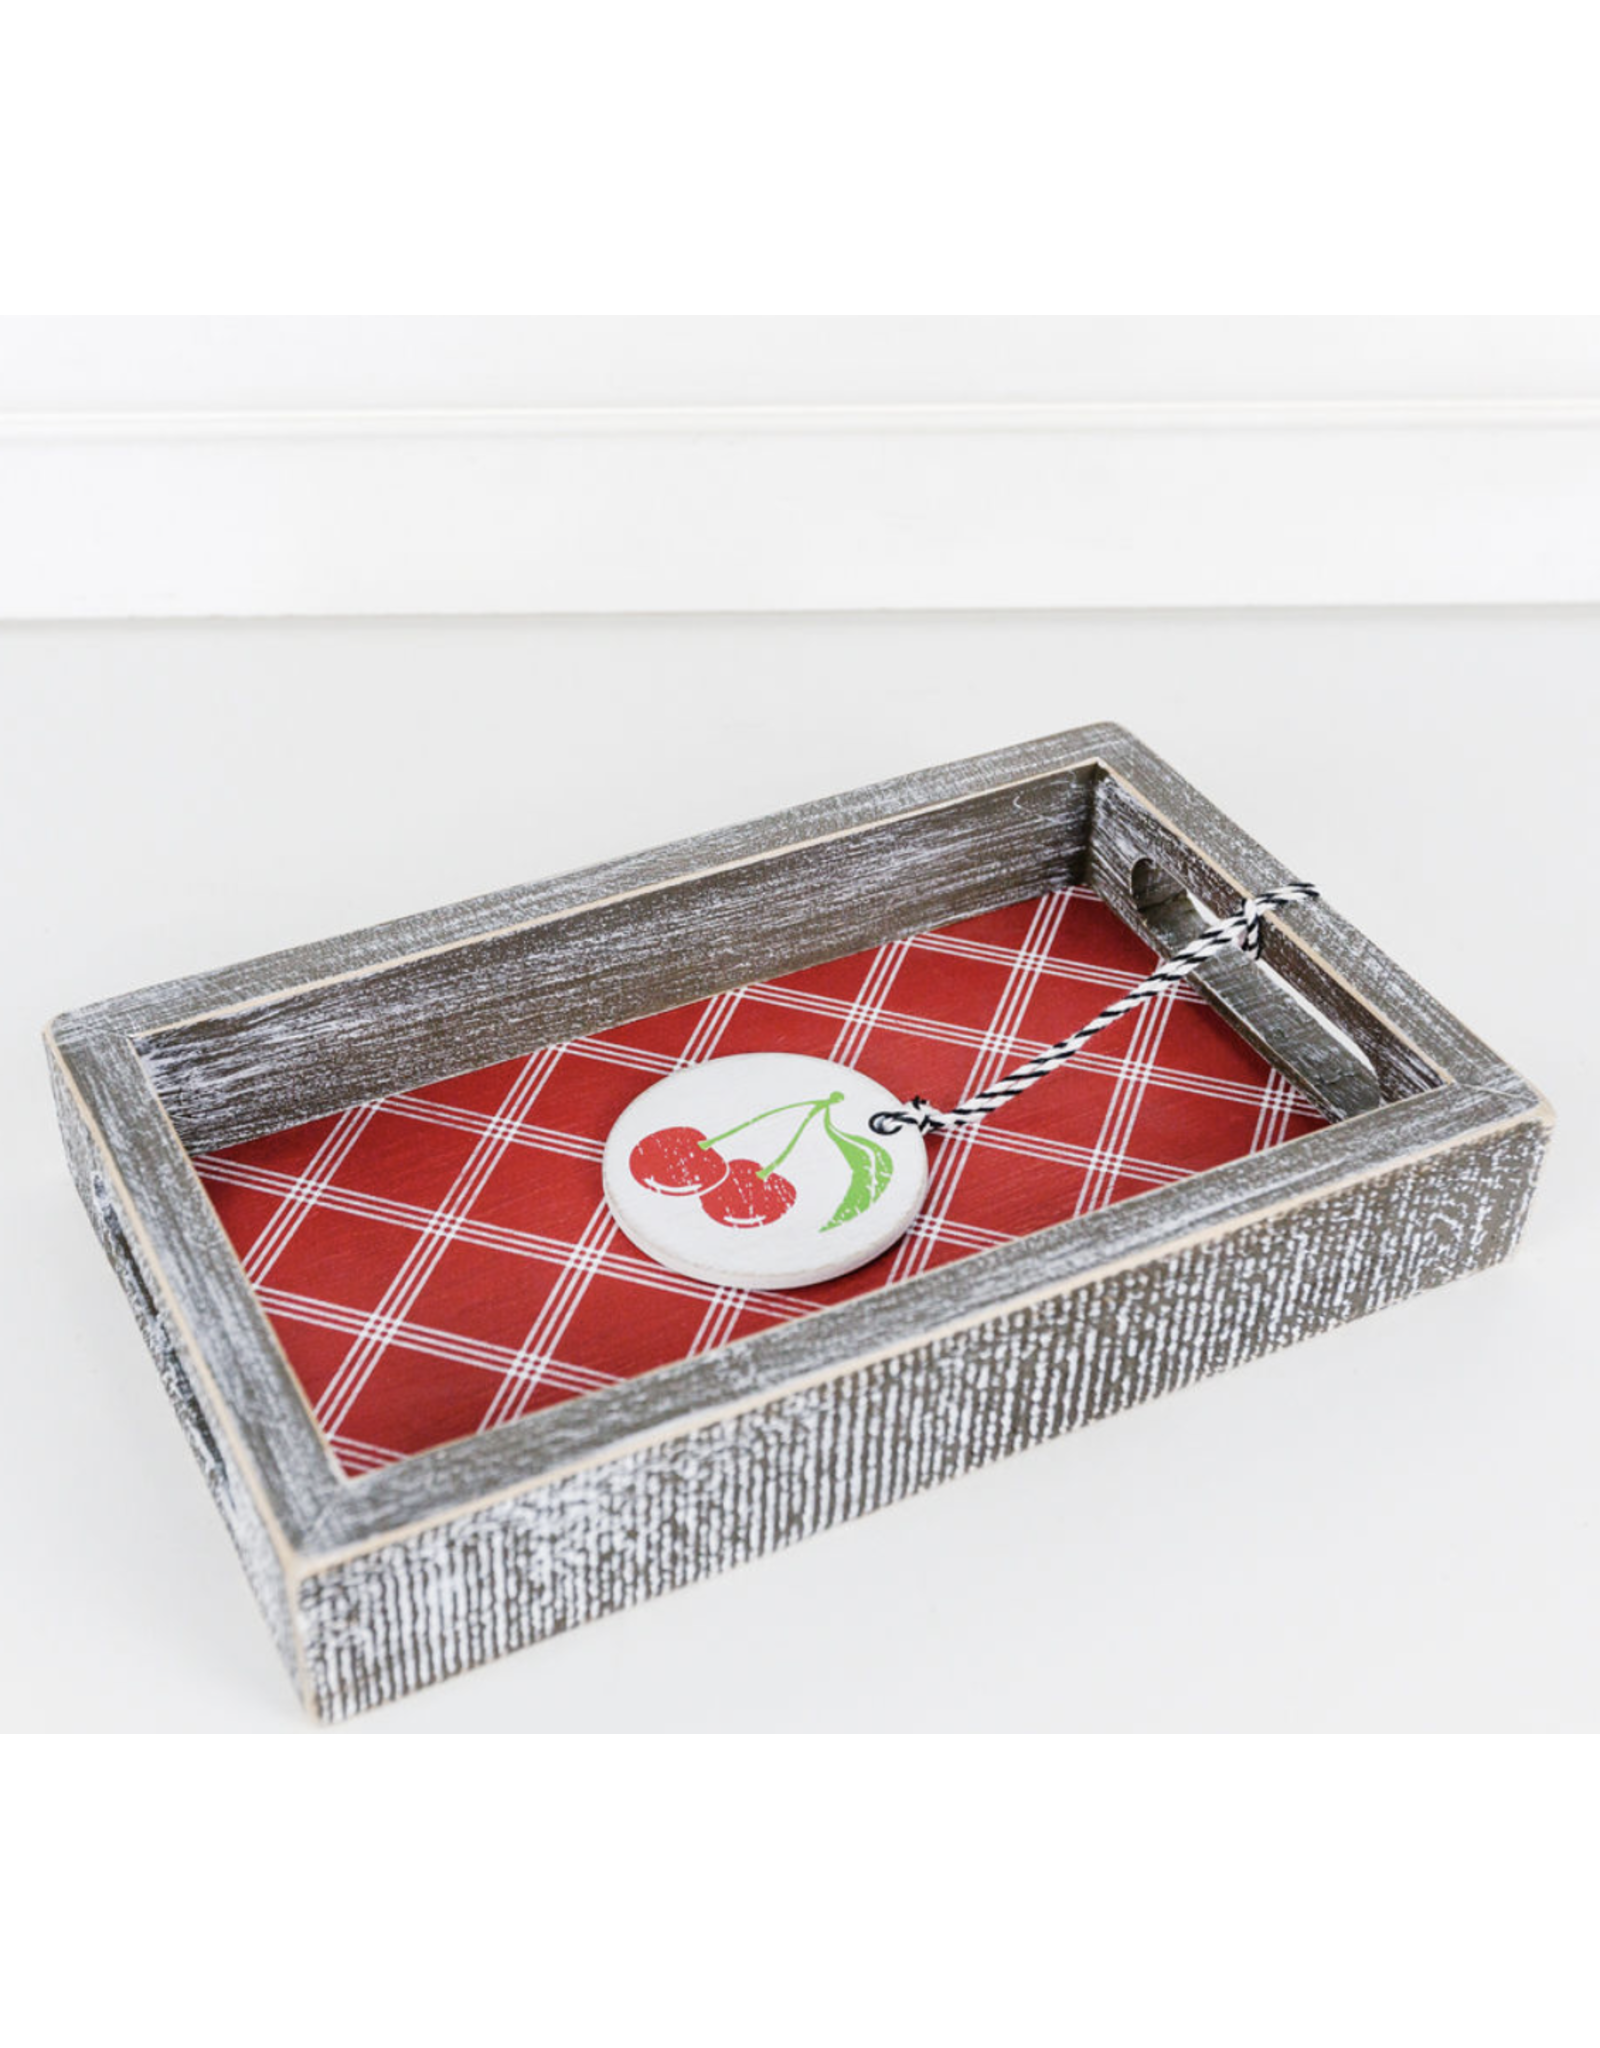 Adams & Co. "I Love You Cherry Much" Wood Tray